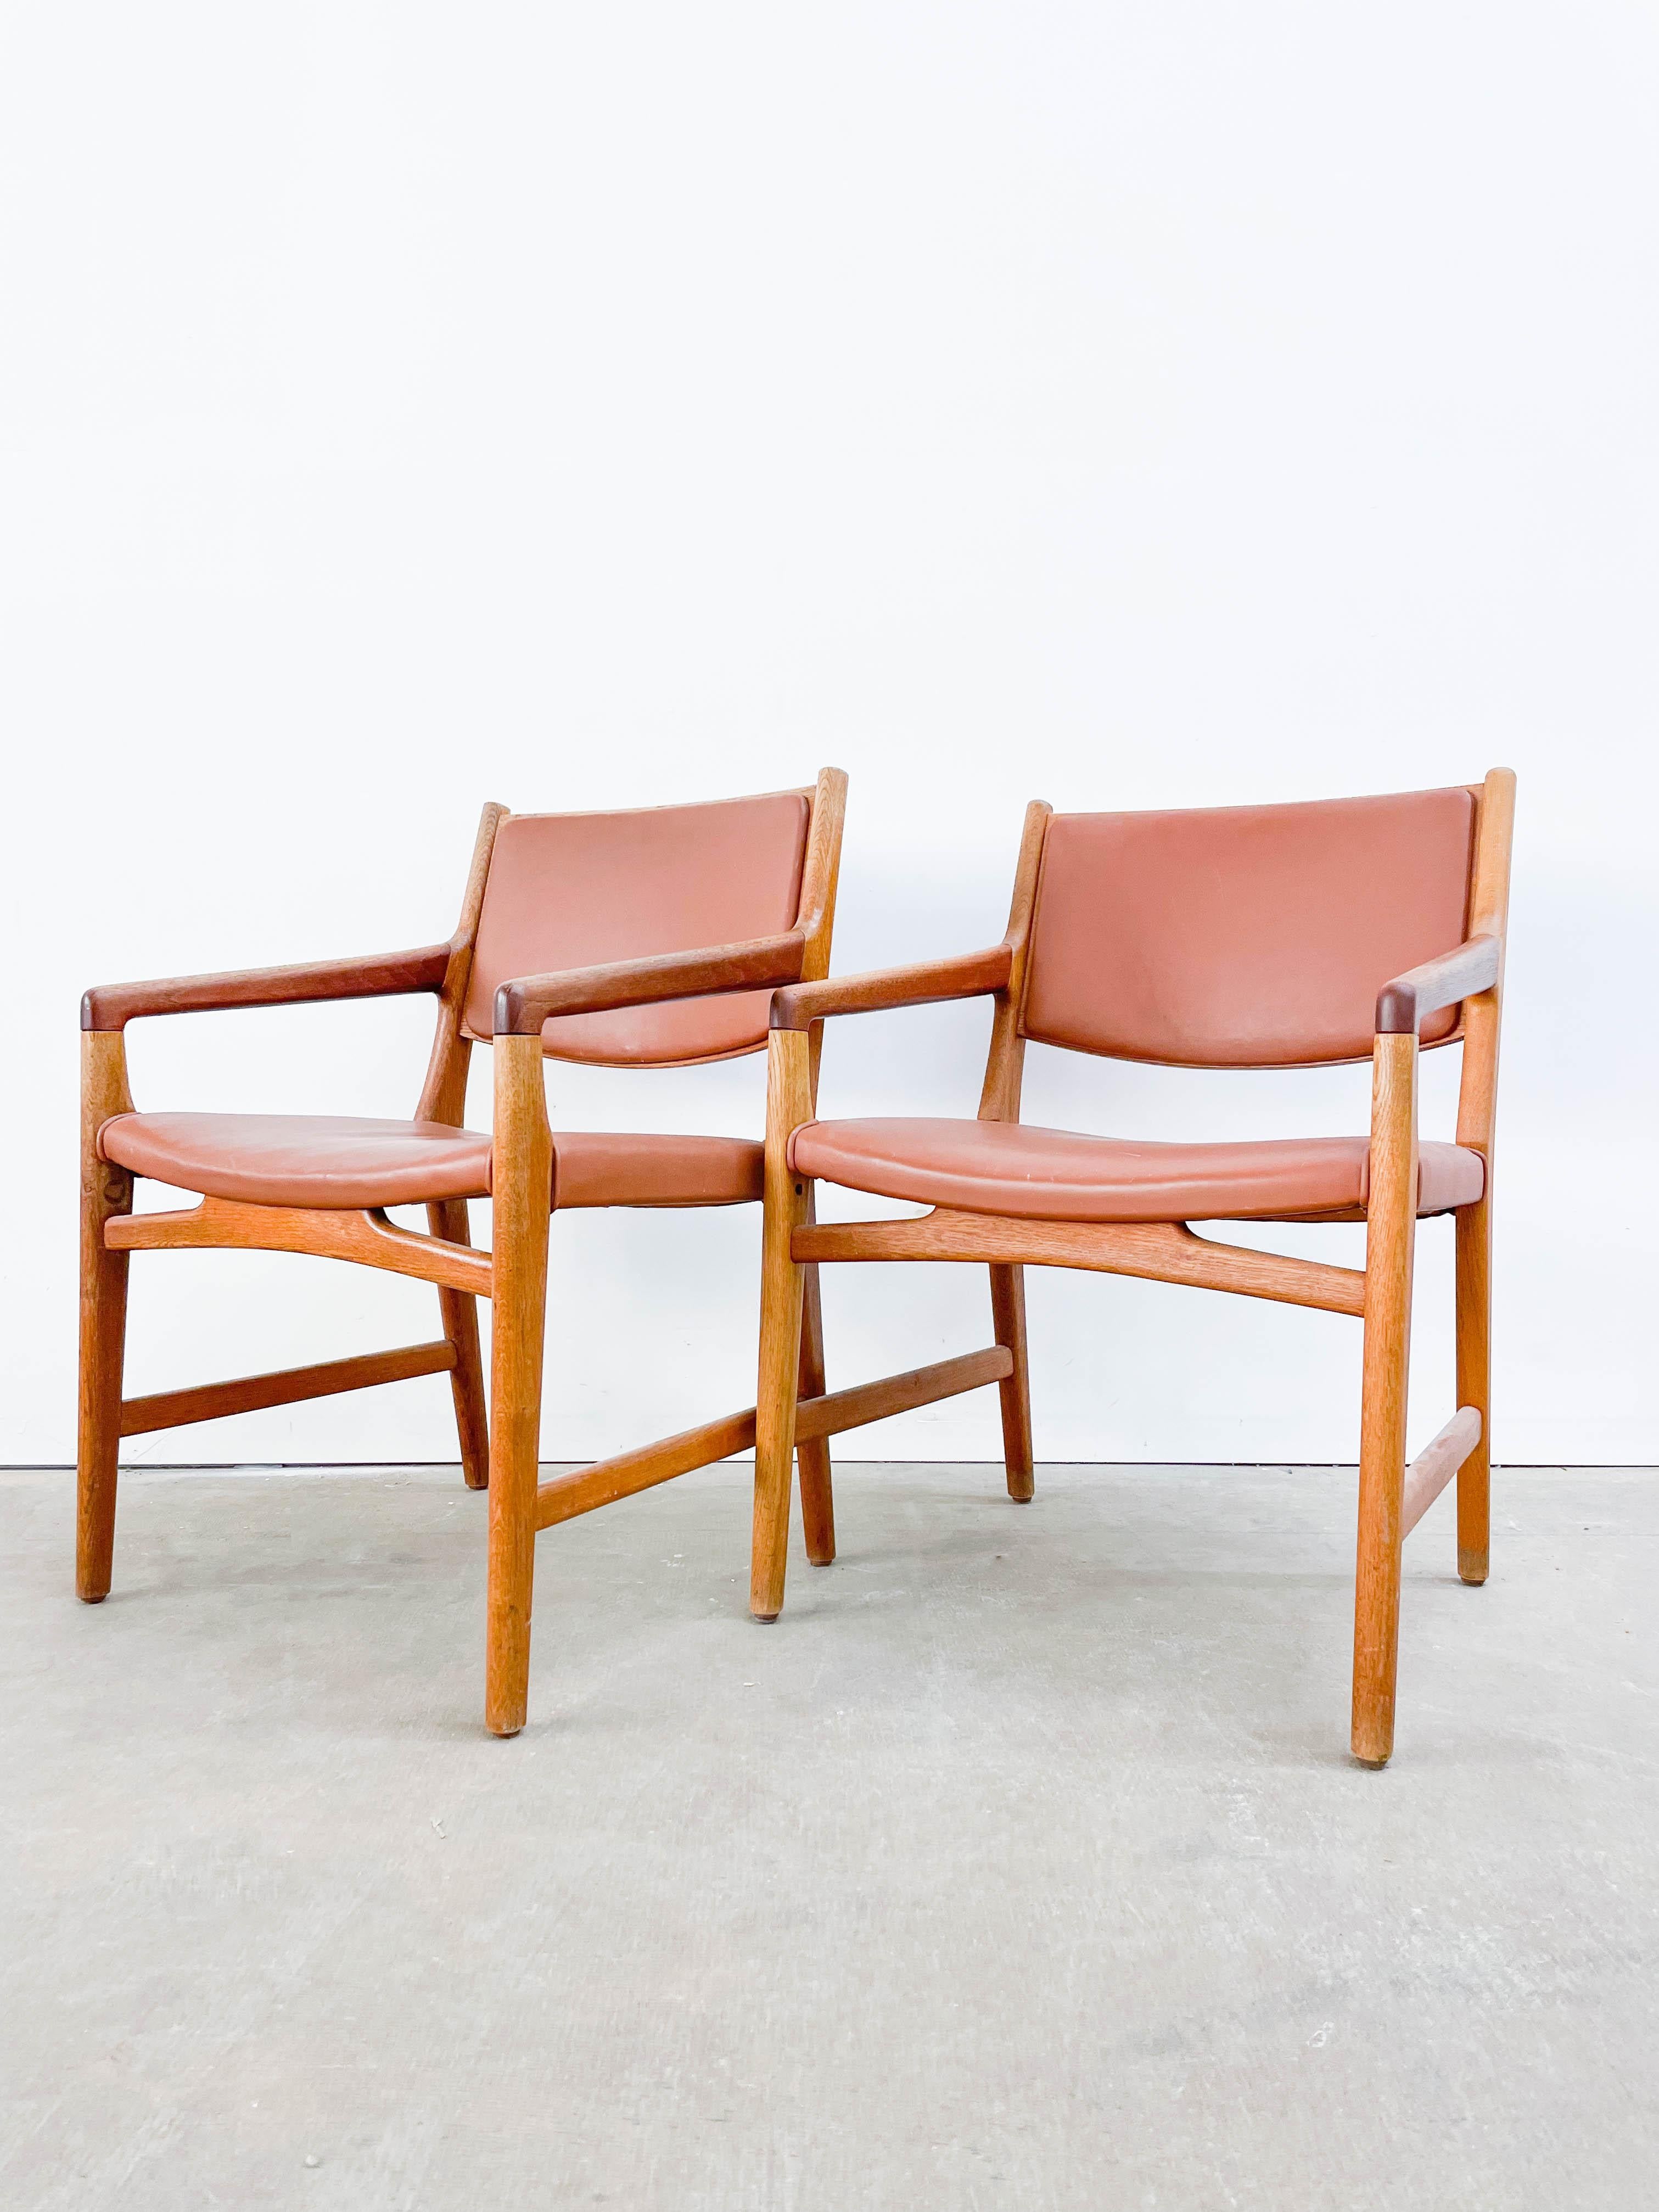 Hans Wegner custom-designed oak and leather chairs for the department store Magasin du Nord. The design was developed specifically for trying on shoes as the angled arms allow for greater arm movement when bending from the waist. Originally in